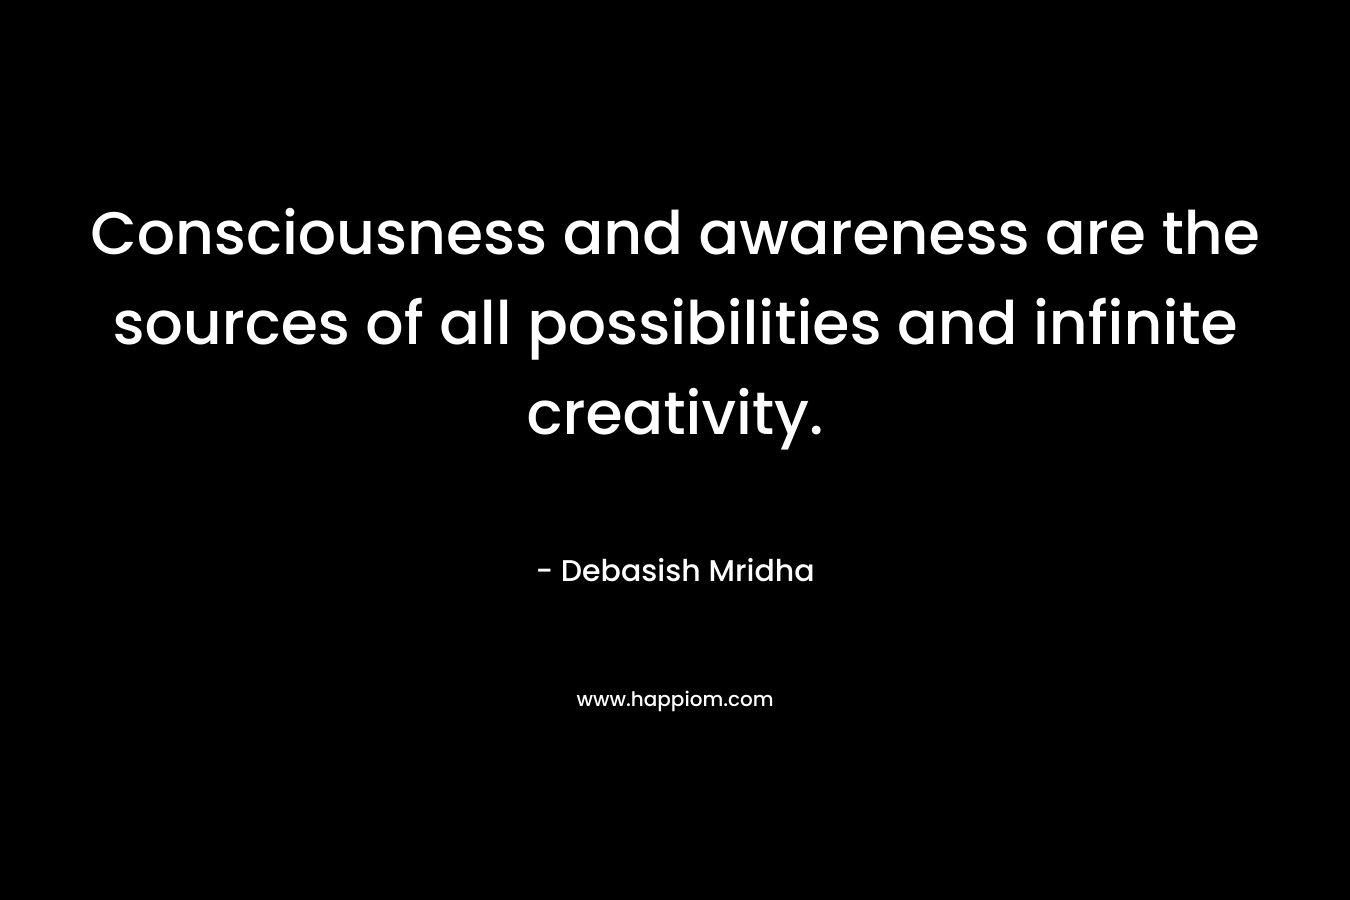 Consciousness and awareness are the sources of all possibilities and infinite creativity.